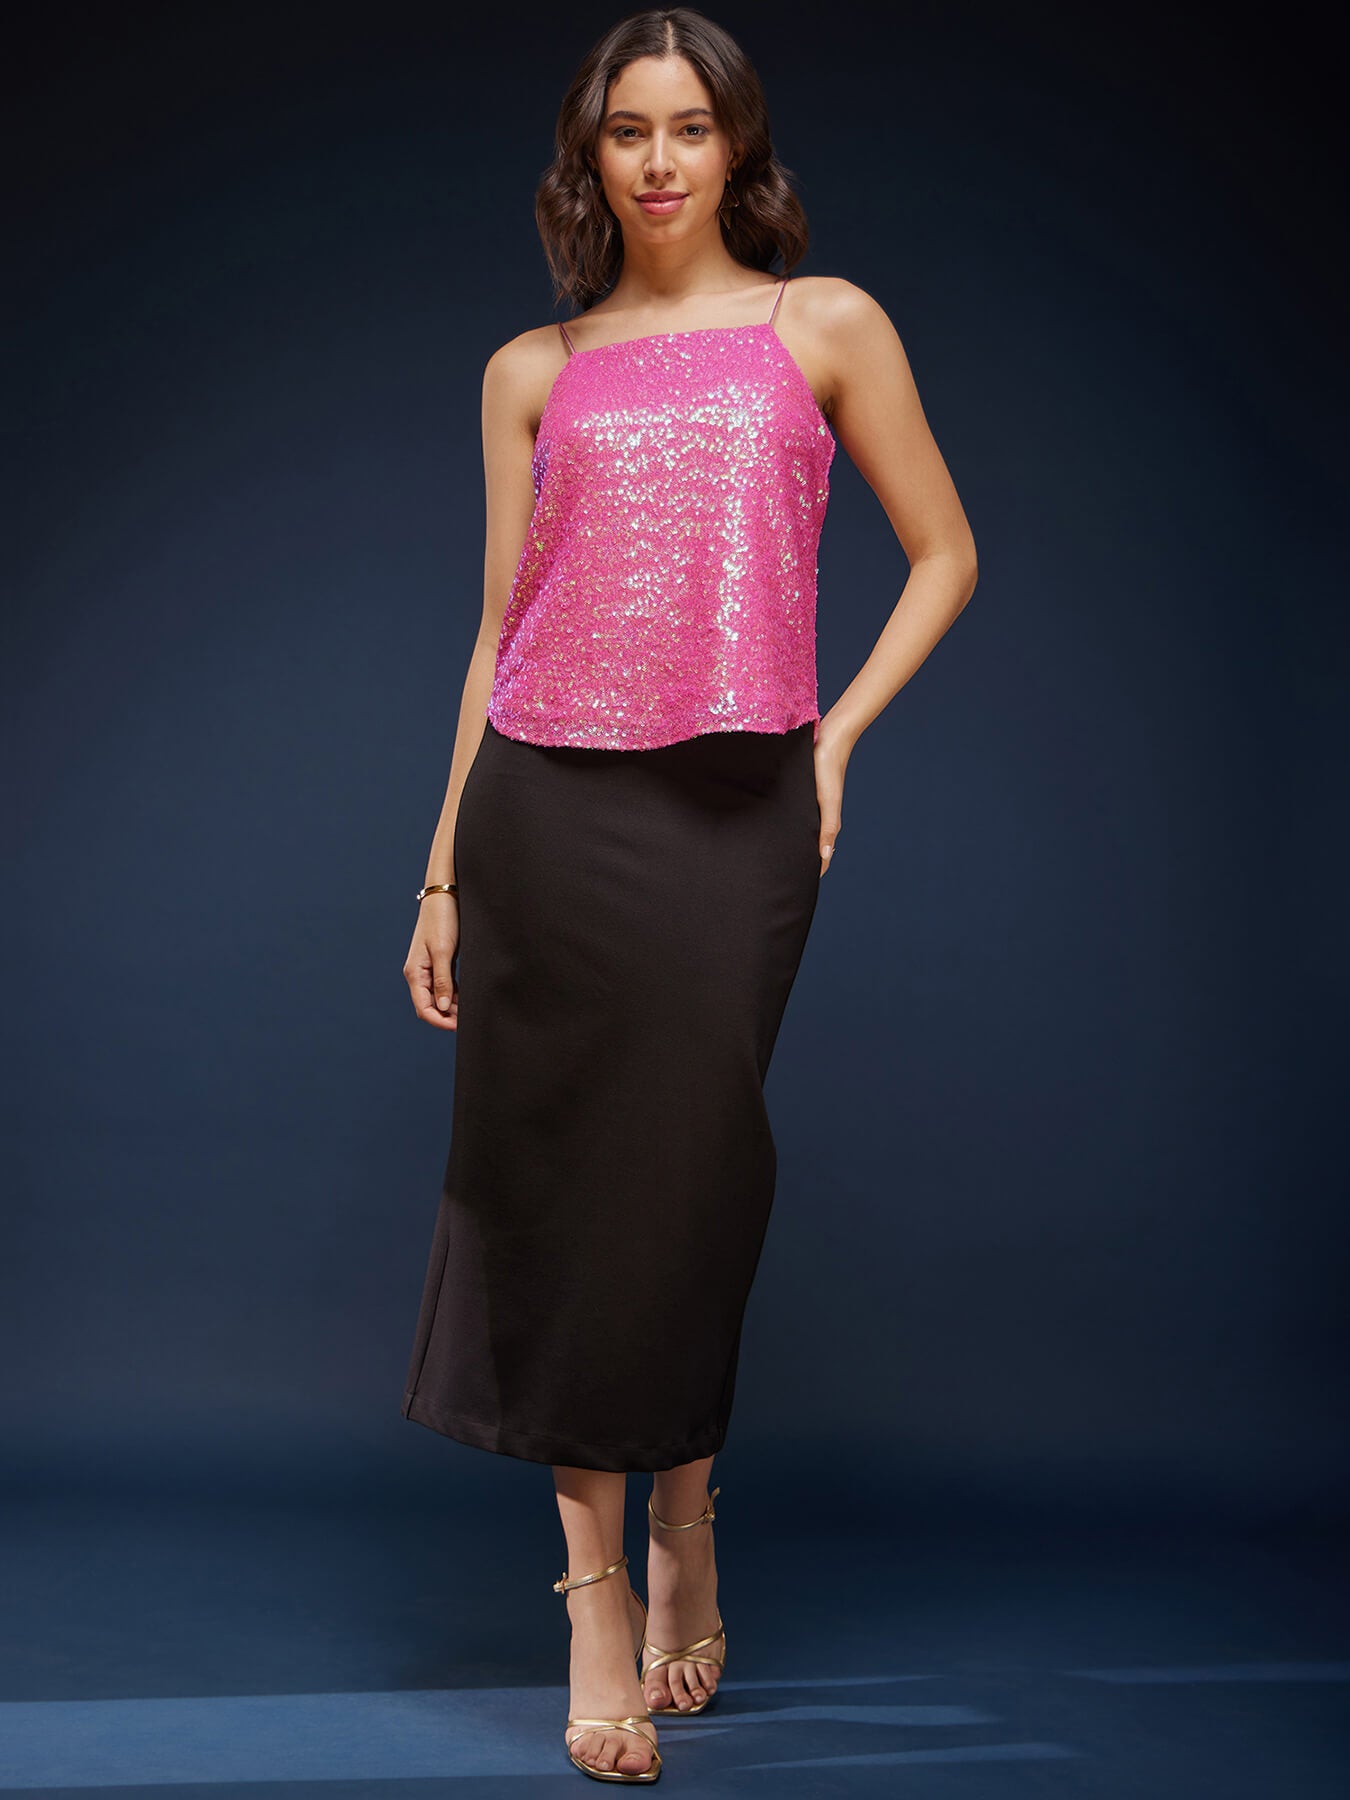 Sequin Straight Camisole - Pink